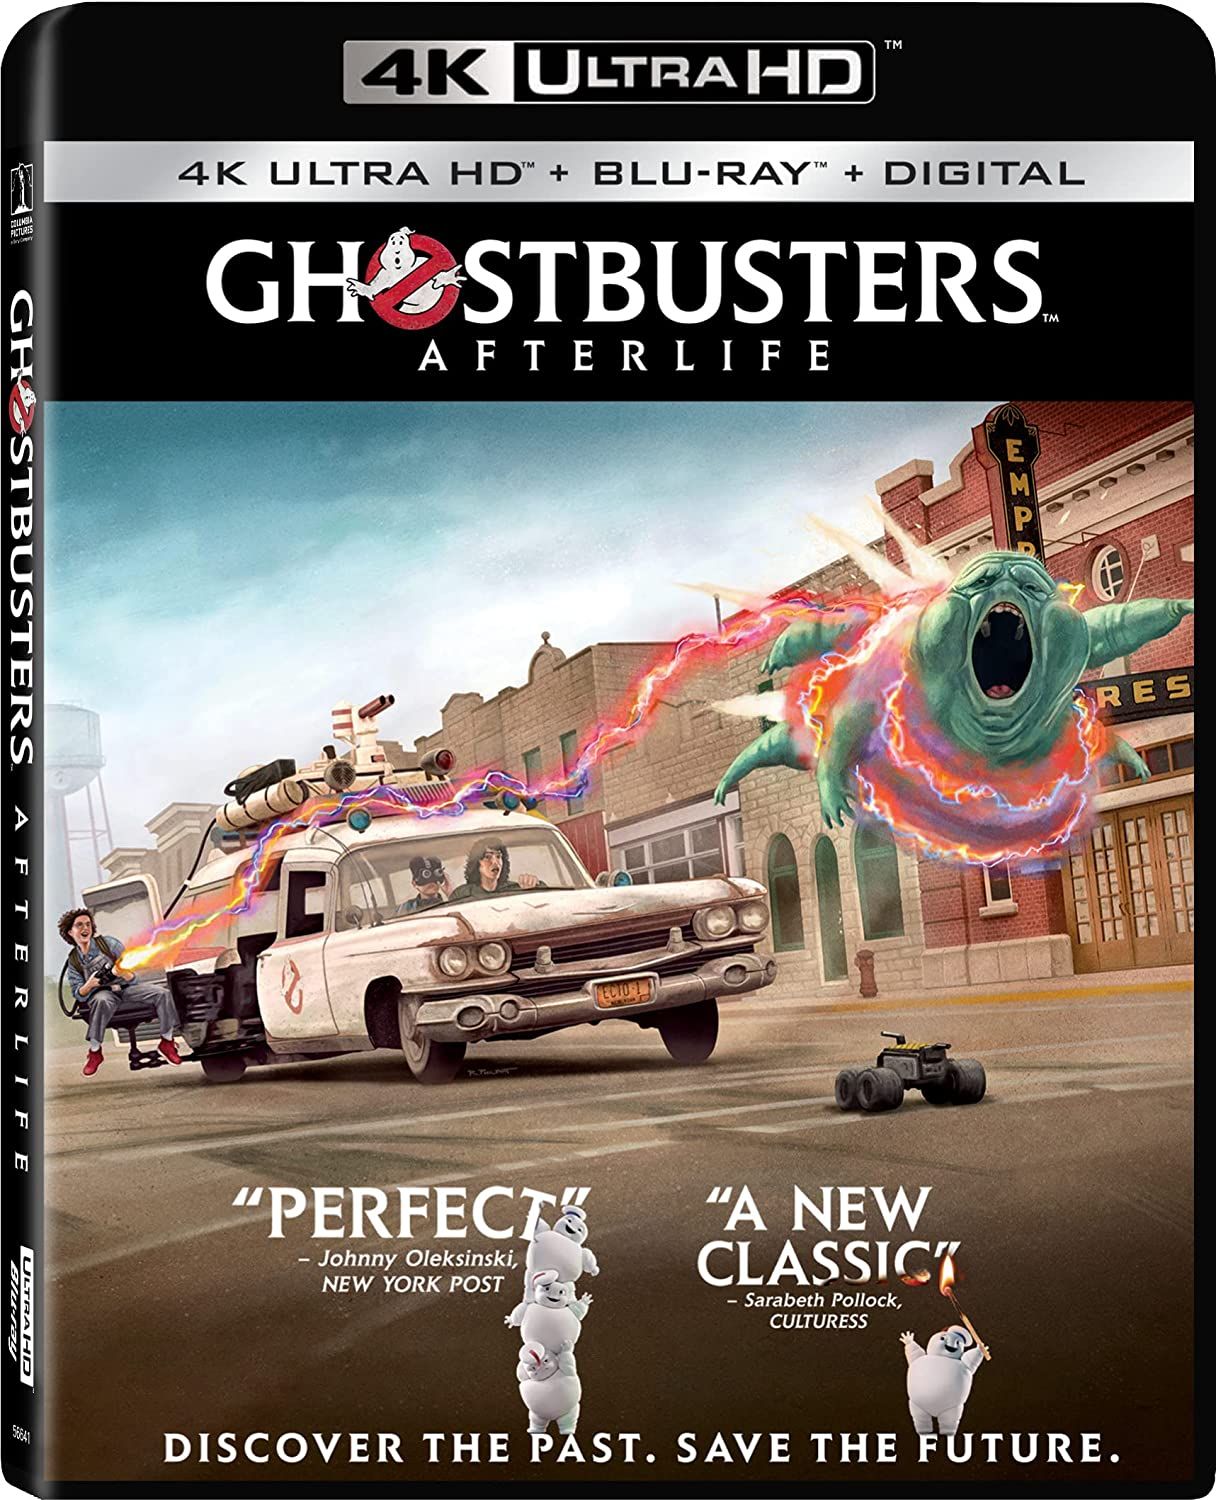 Ghostbusters-Afterlife-4k-Blu-ray